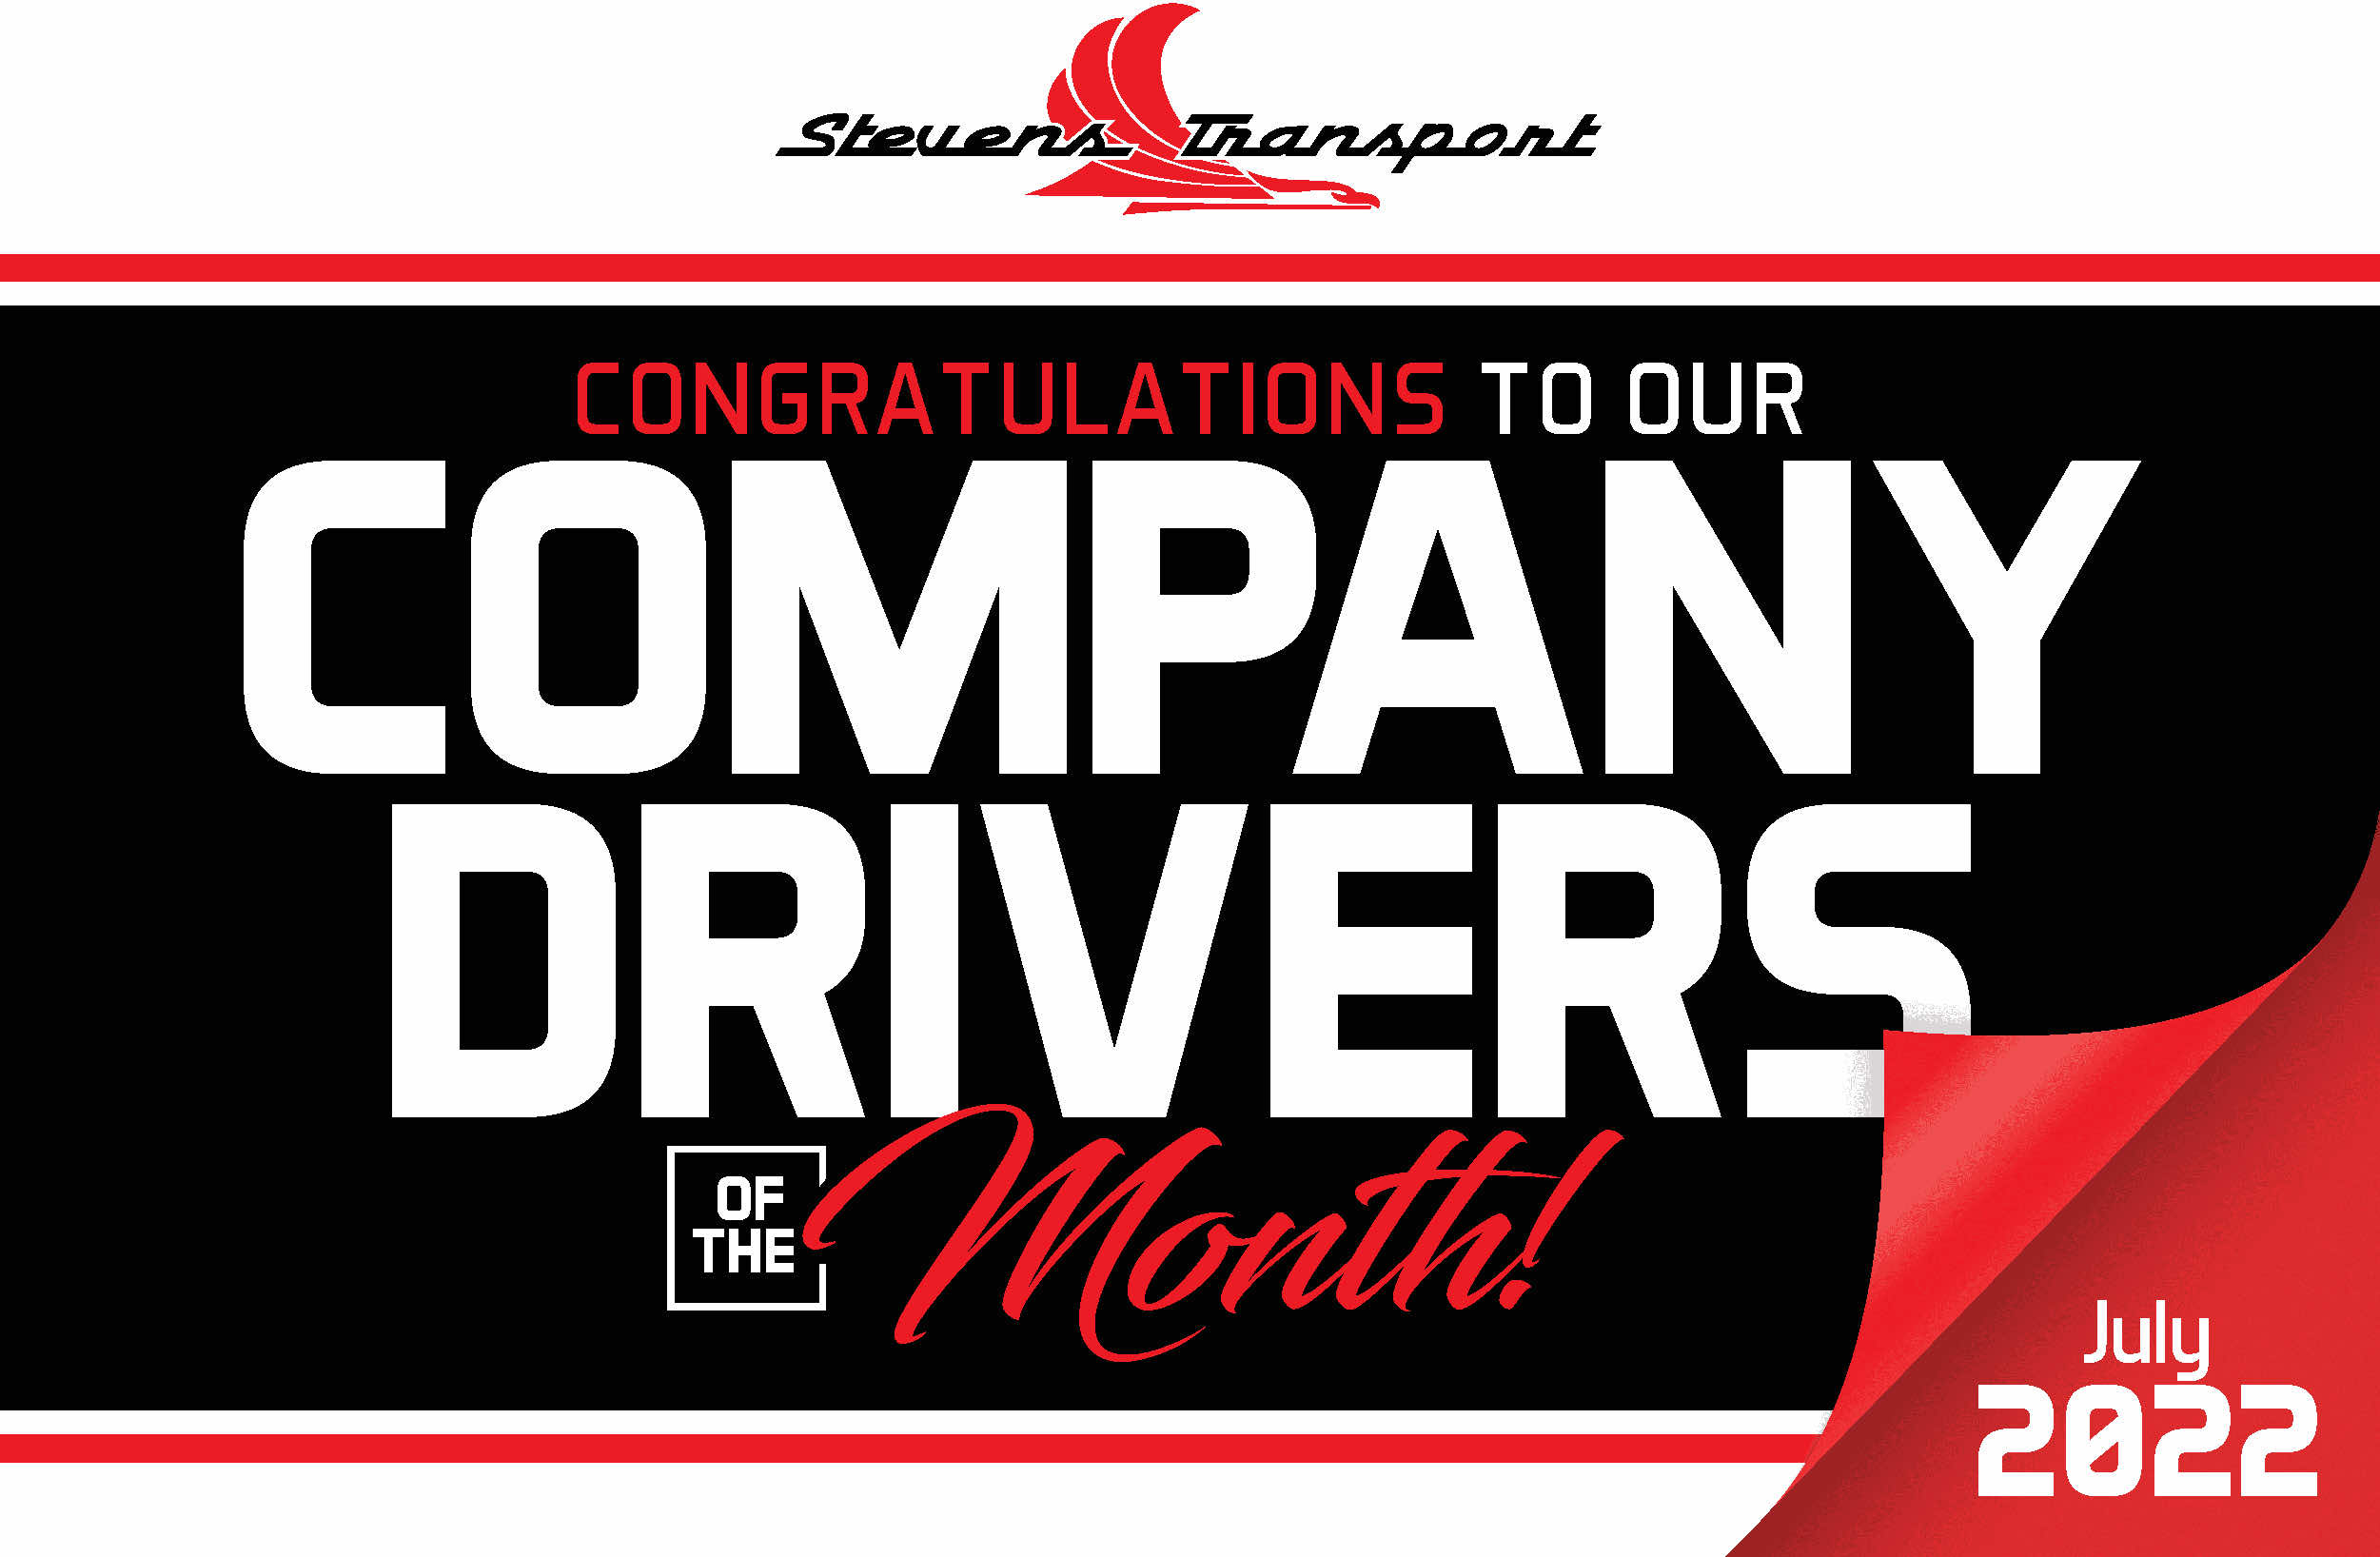 Graphic with text congratulations to our company drivers of the month for July 2022